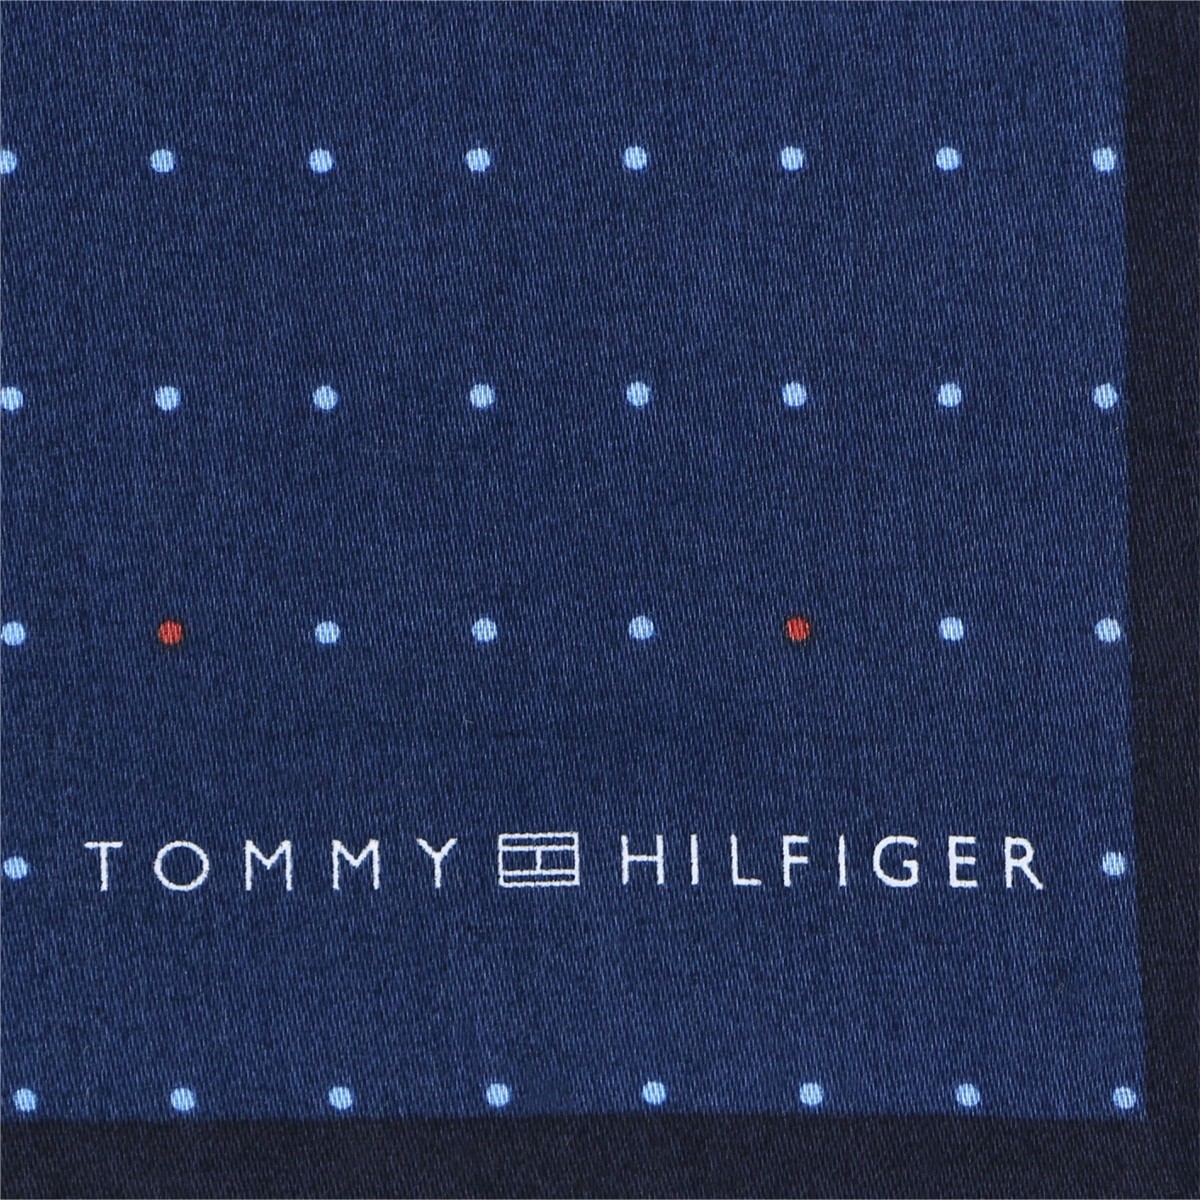 TOMMY HILFIGER Tommy Hilfiger brand pin dot pattern cotton 100% handkerchie 02582153 gift material including in a package free small gift 